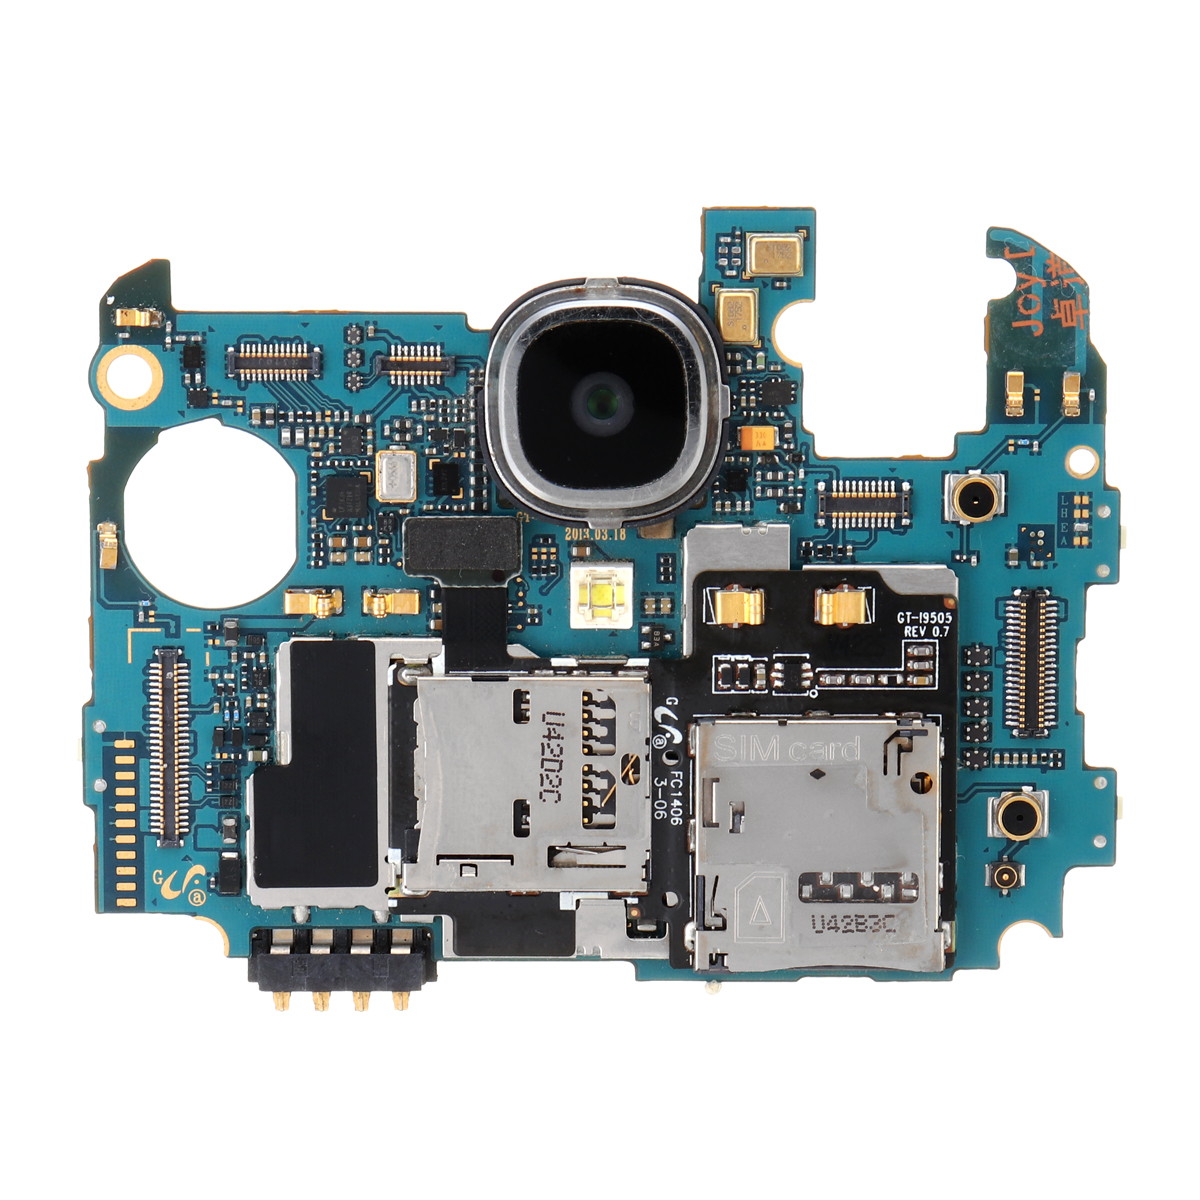 

Motherboard + Camera Module Replacement For Samsung Galaxy S4 (I9505)